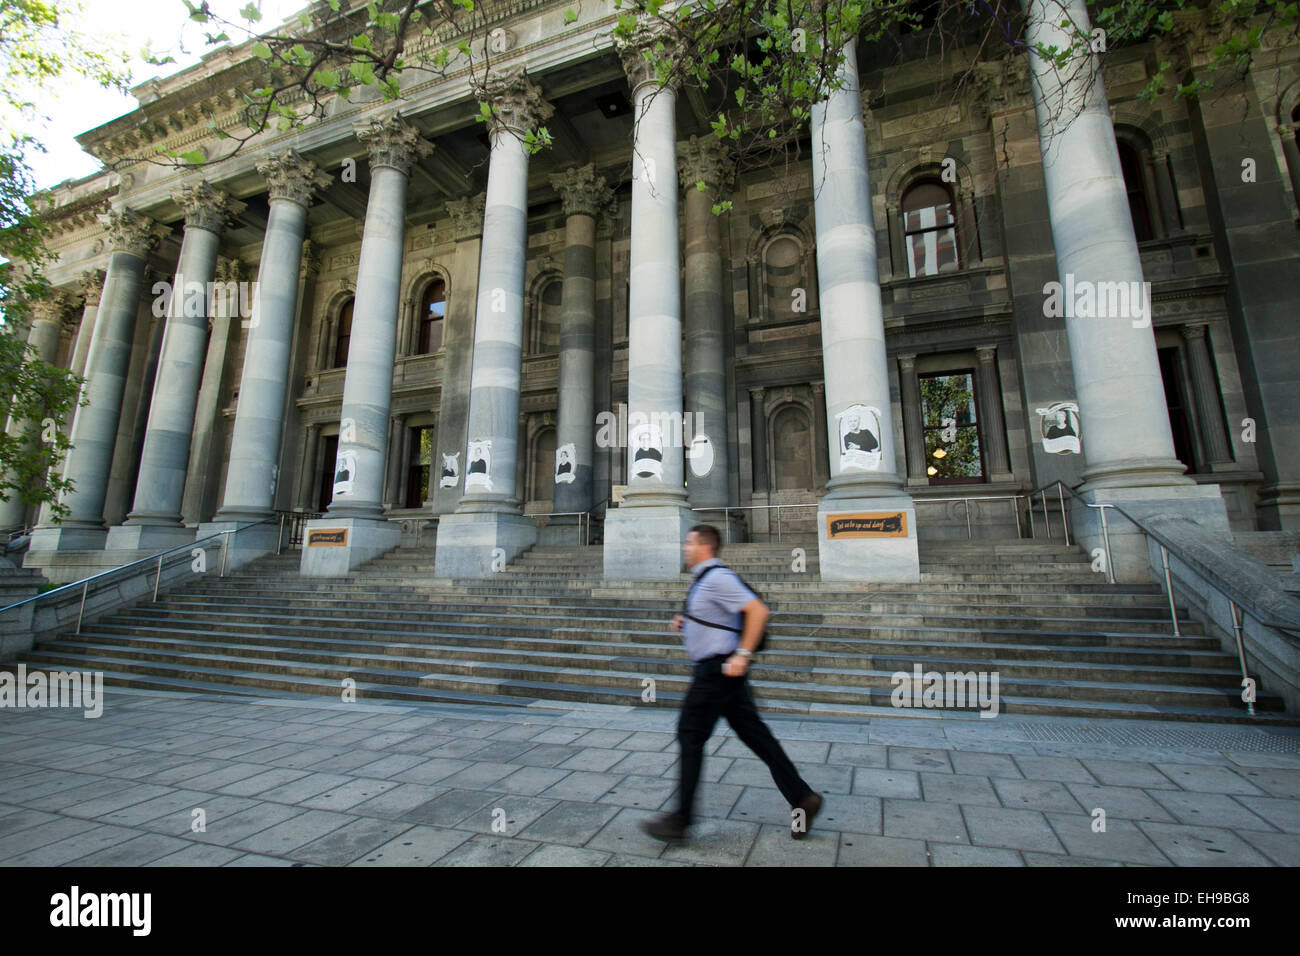 Adelaide, Australia. 10th March 2015. The first serving women politicians including former Australian Prime Minister Julia Gillard  are named and  pictured on the columns of South Australia parliament in Adelaide © amer ghazzal/Alamy Live News Stock Photo